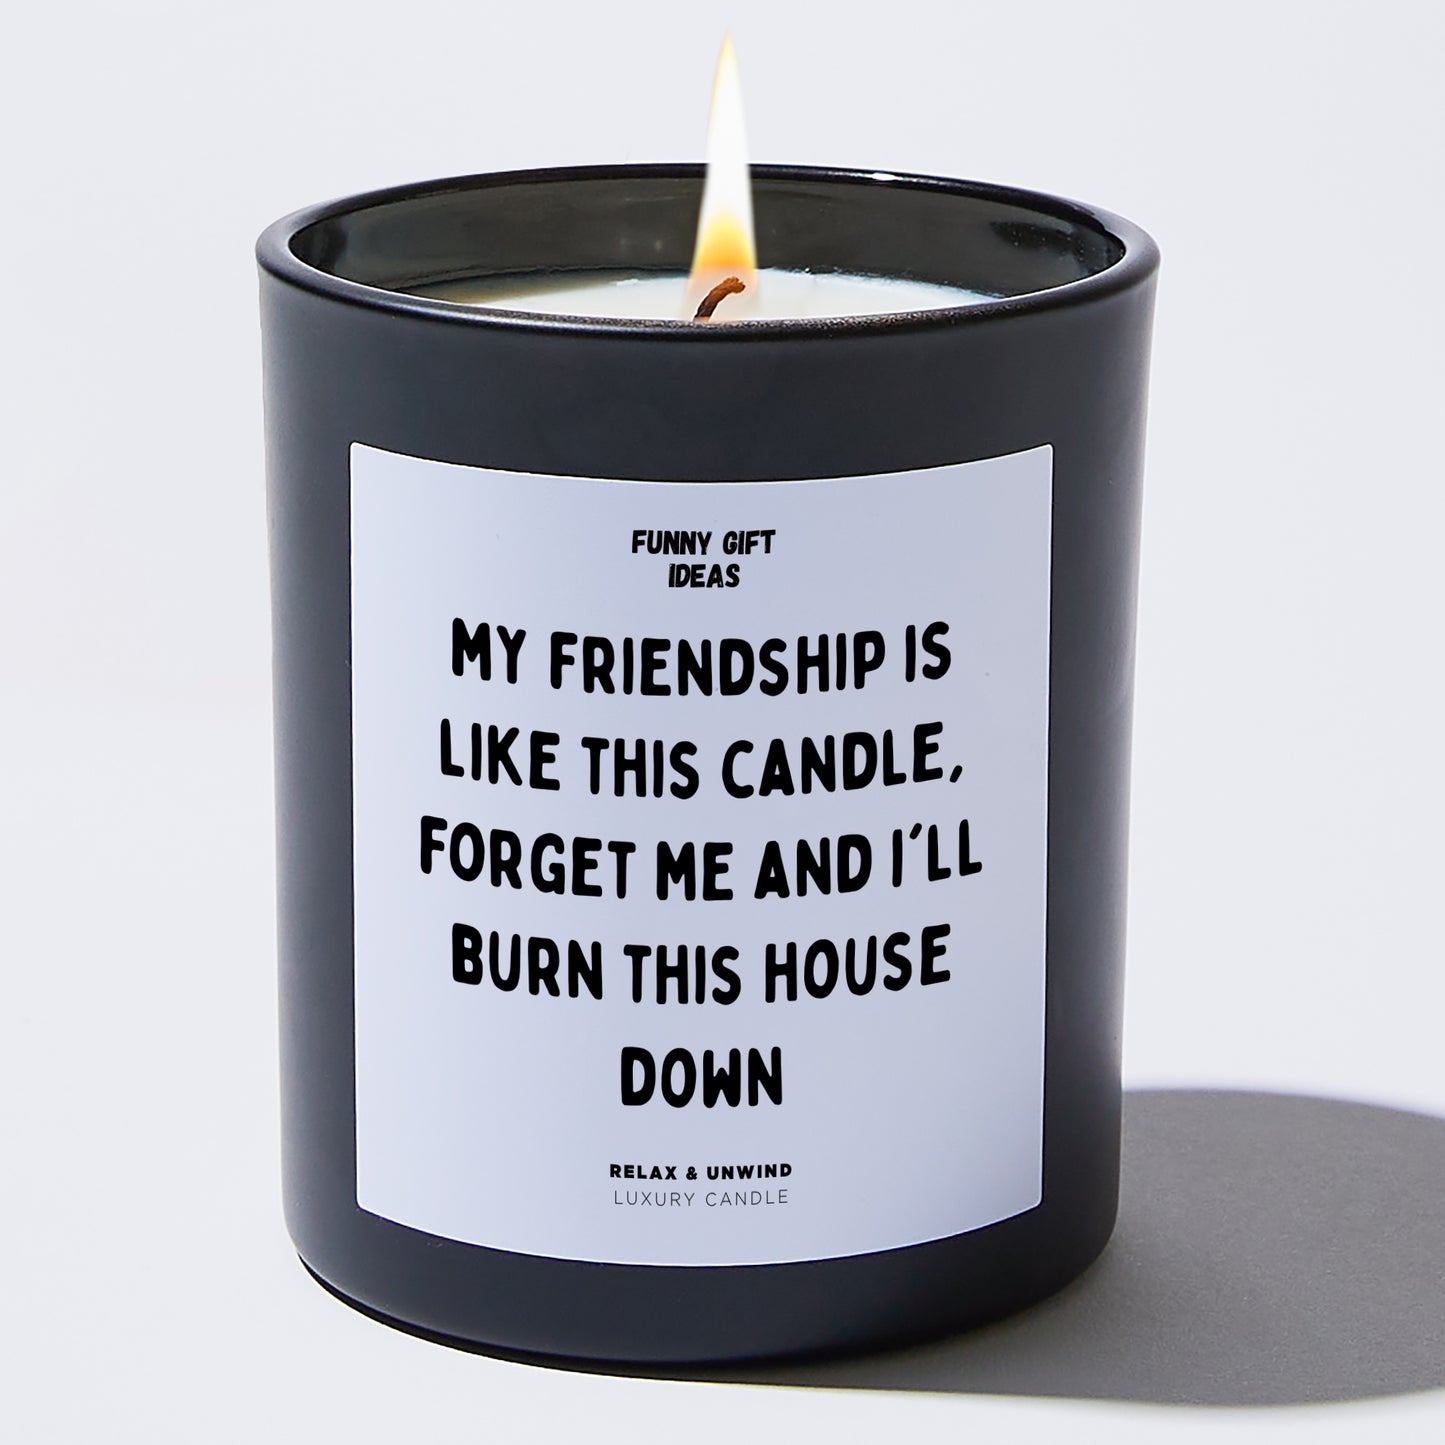 Fun Gift for Friends My Friendship Is Like This Candle! Forget Me And I'll Burn This House Down - Funny Gift Ideas